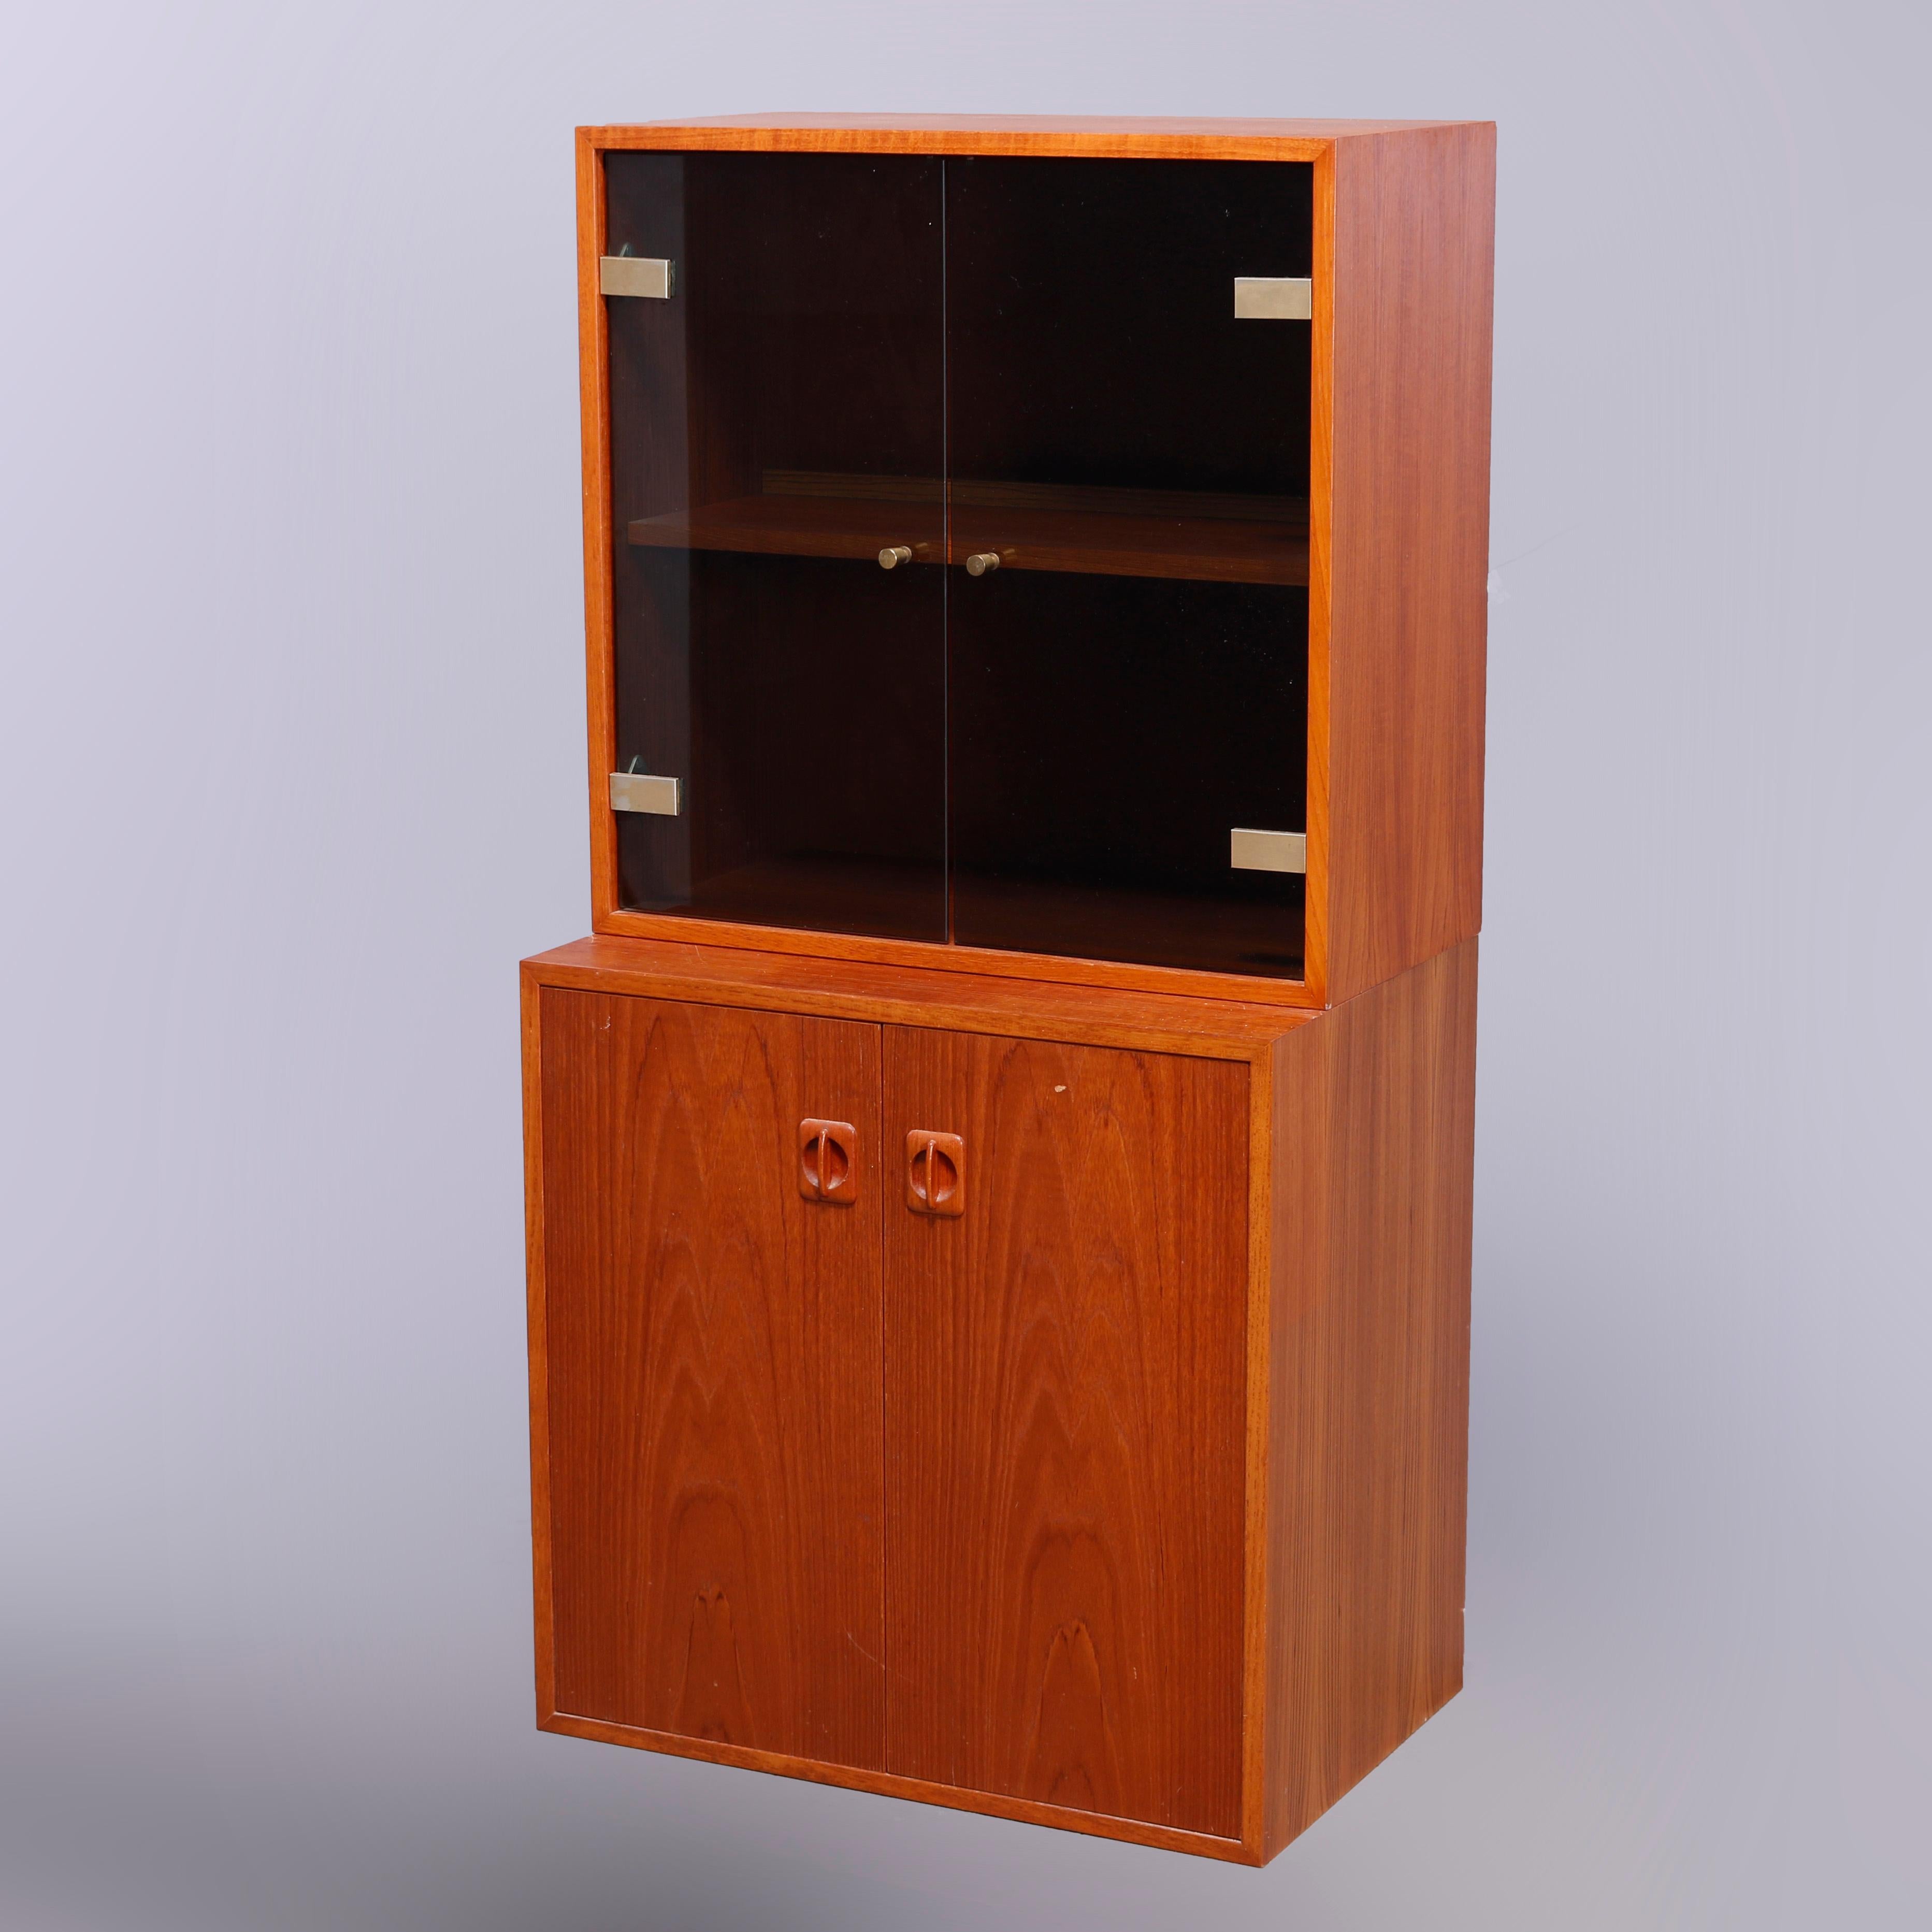 A Mid Century Danish Modern cabinet offers upper with glass doors opening to shelved interior and surmounting lower blind door cabinet, Denmark label as photographed, c1960

Measures - 47.5'' H x 23.75'' W x 15.75'' D.